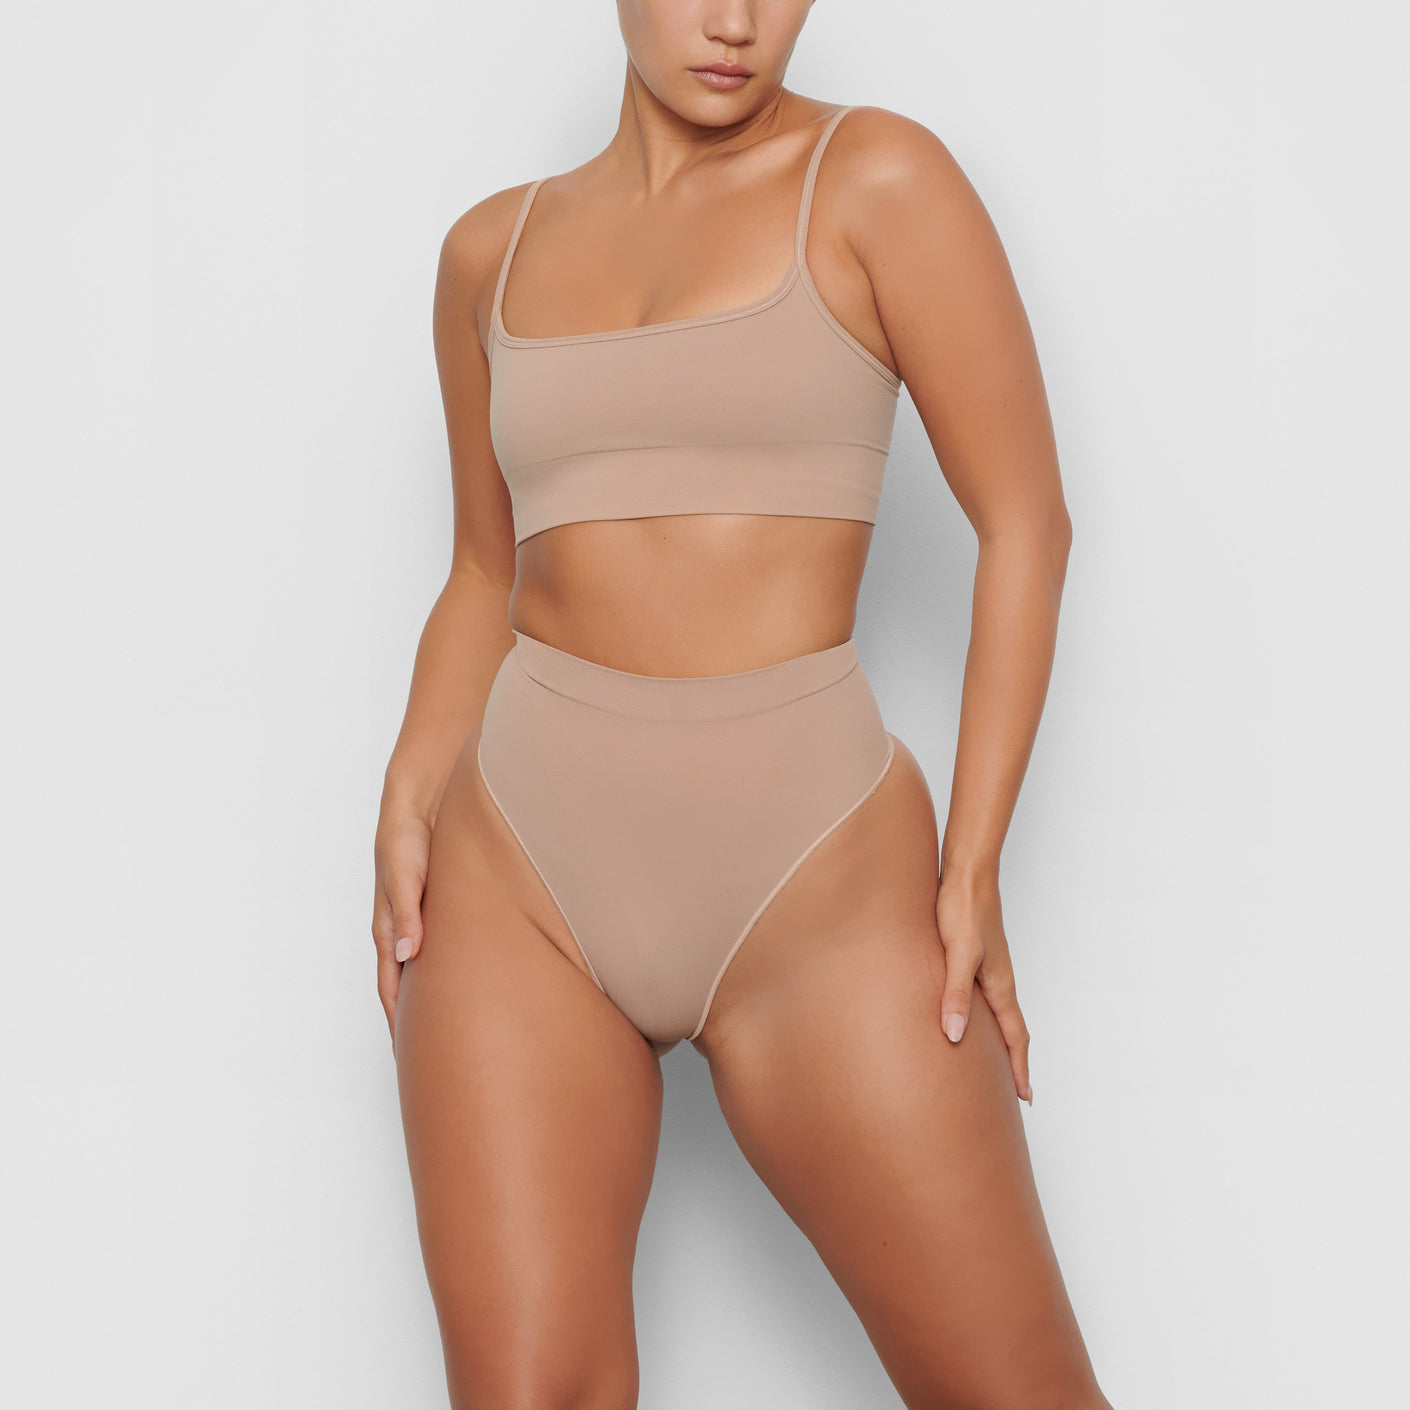 New Skims Shapewear Womens Size L sand color High Waisted Undies Thong  (T1-8) 